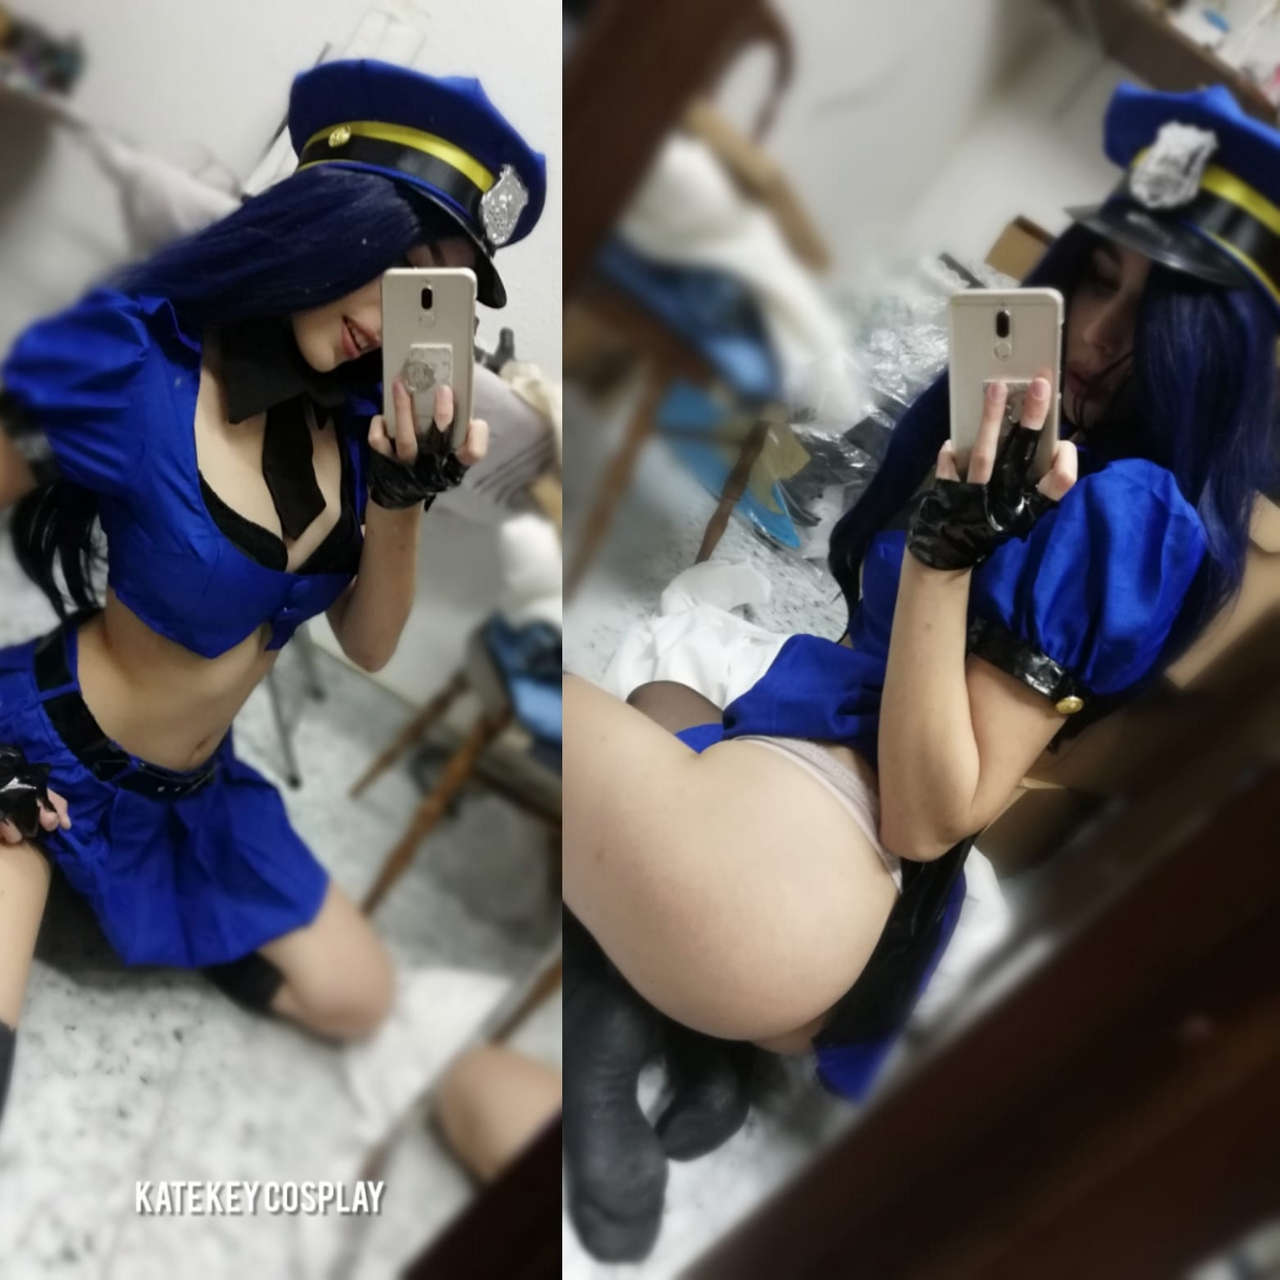 Officer Caitlyn From League Of Legends By Kate Key Sel